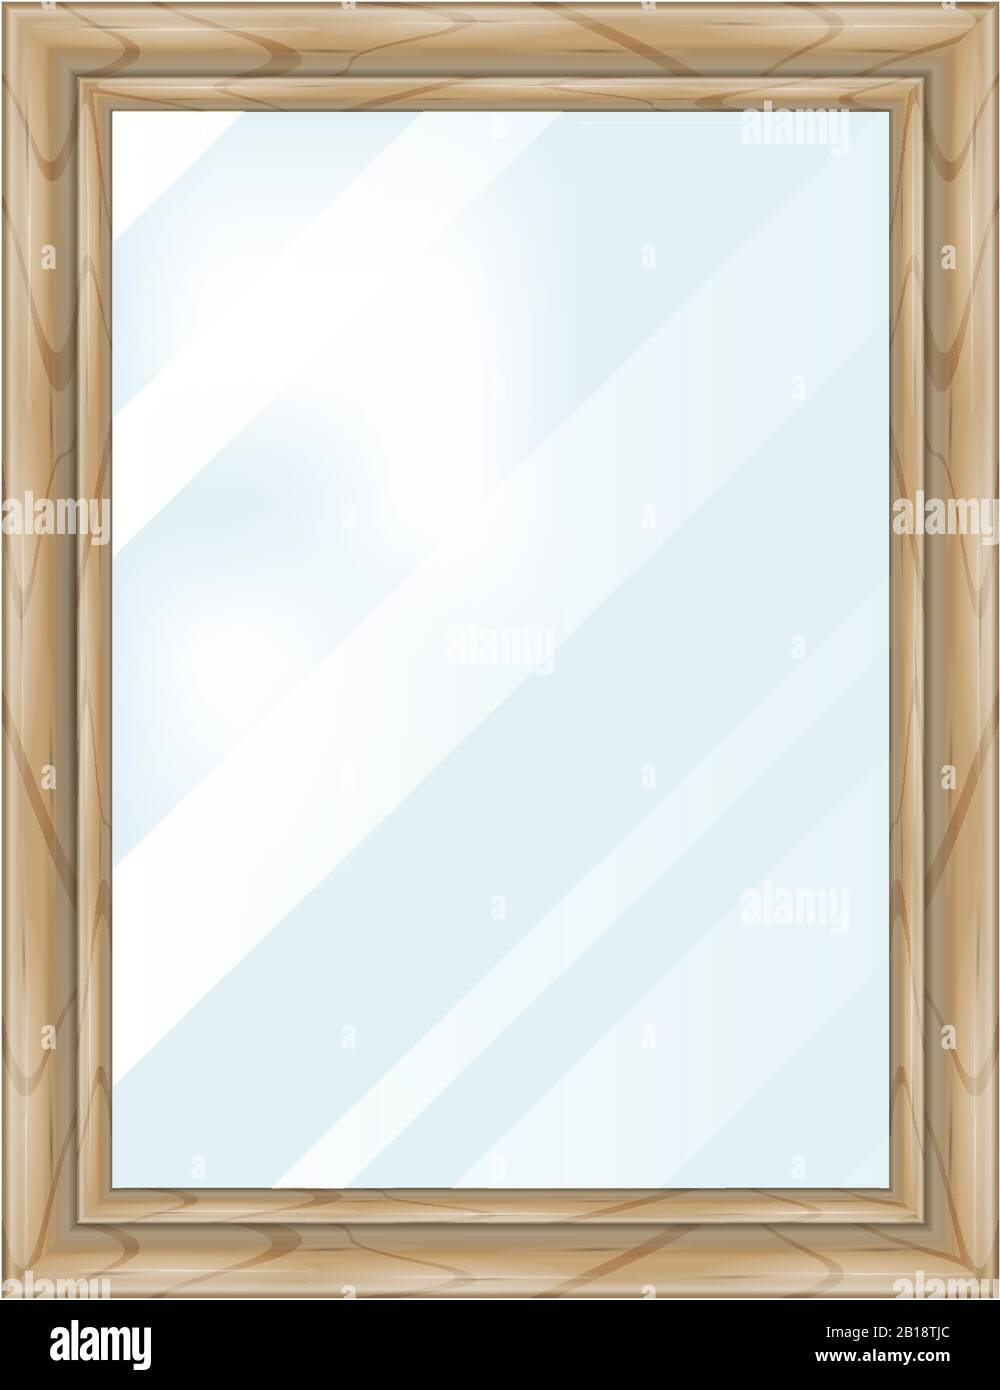 Single wooden window frame with glass isolated on white. Realistic vector illustration. Textured window frame, sun rays on the glass. Stock Vector